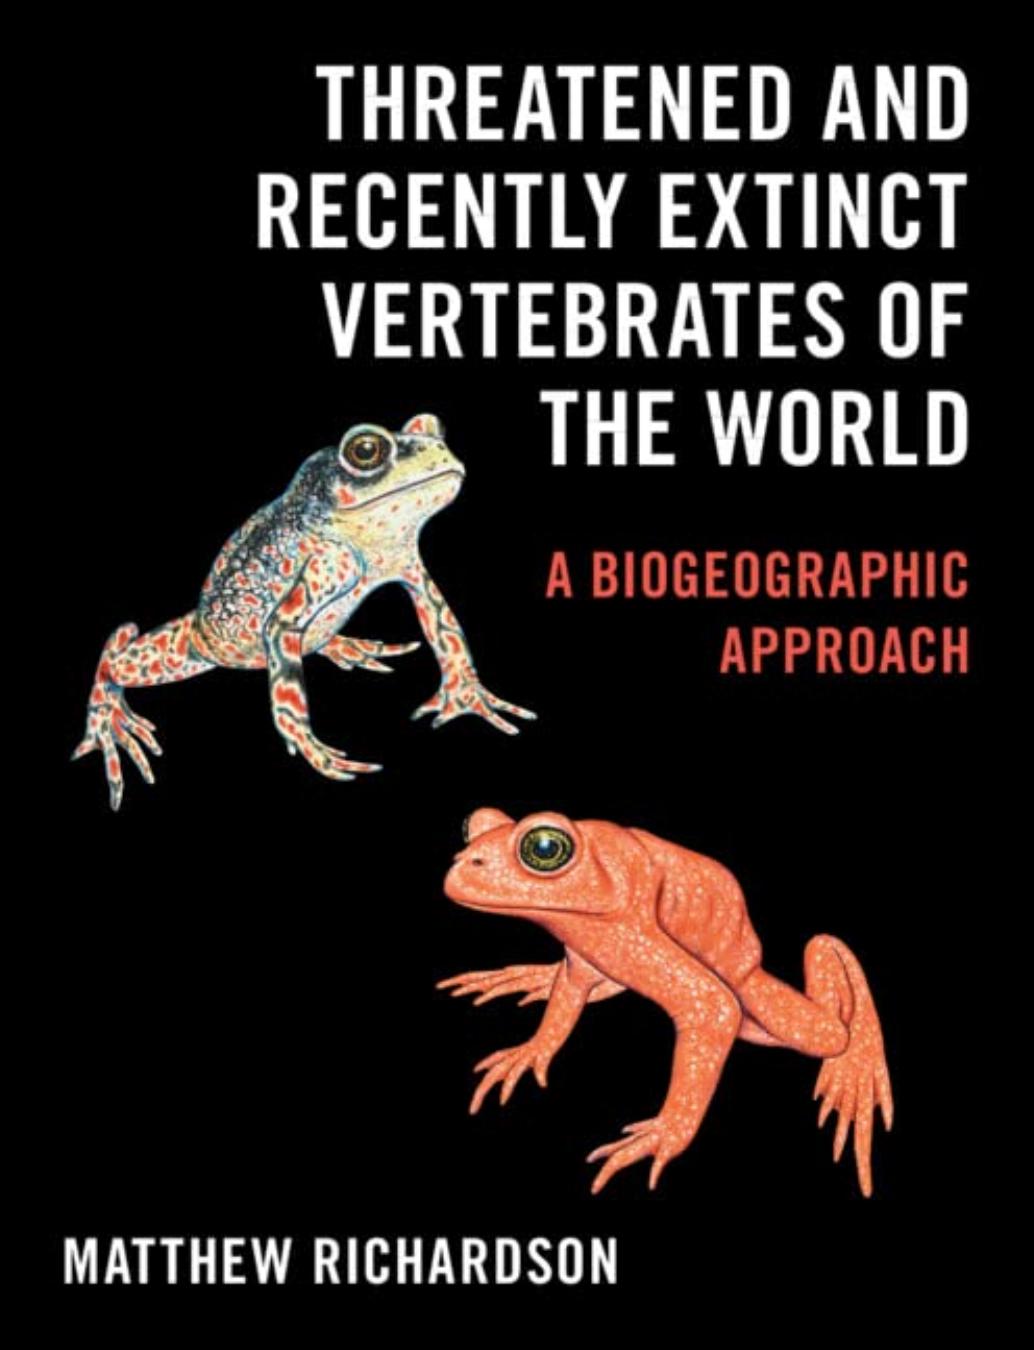 Threatened and Recently Extinct Vertebrates of the World: A Biogeographic Approach by Matthew Richardson